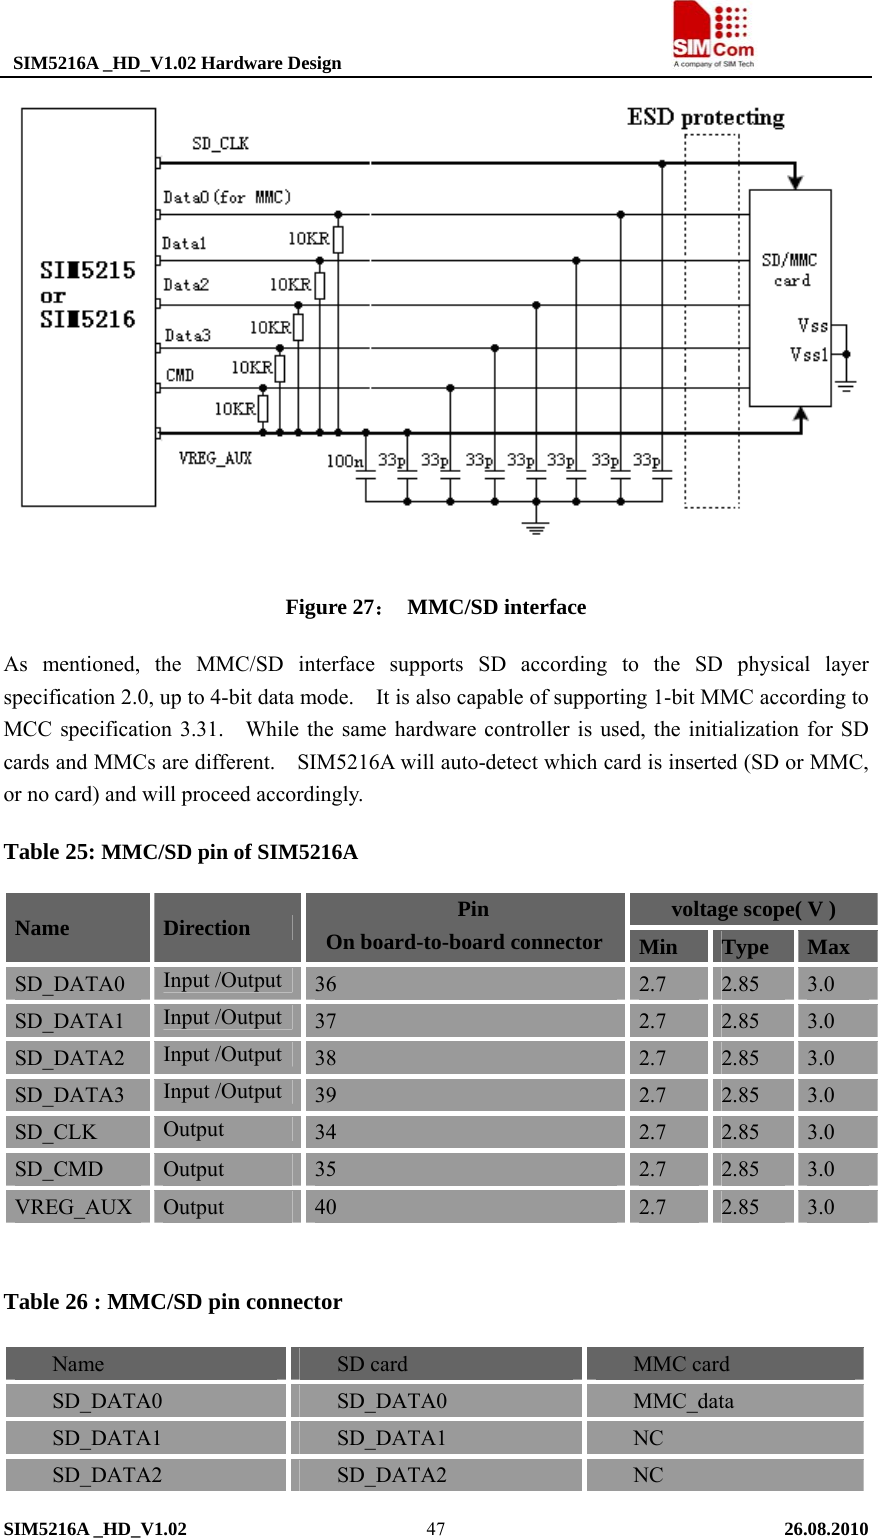  SIM5216A _HD_V1.02 Hardware Design                                     SIM5216A _HD_V1.02   26.08.2010   47 Figure 27： MMC/SD interface As mentioned, the MMC/SD interface supports SD according to the SD physical layer specification 2.0, up to 4-bit data mode.    It is also capable of supporting 1-bit MMC according to MCC specification 3.31.    While the same hardware controller is used, the initialization for SD cards and MMCs are different.    SIM5216A will auto-detect which card is inserted (SD or MMC, or no card) and will proceed accordingly.   Table 25: MMC/SD pin of SIM5216A voltage scope( V ) Name  Direction               Pin   On board-to-board connector  Min  Type  Max SD_DATA0  Input /Output  36  2.7     2.85  3.0 SD_DATA1  Input /Output  37  2.7     2.85  3.0 SD_DATA2  Input /Output  38  2.7     2.85  3.0 SD_DATA3  Input /Output  39  2.7     2.85  3.0 SD_CLK  Output  34  2.7     2.85  3.0 SD_CMD  Output  35  2.7     2.85  3.0 VREG_AUX  Output  40  2.7    2.85  3.0  Table 26 : MMC/SD pin connector Name  SD card  MMC card SD_DATA0  SD_DATA0  MMC_data SD_DATA1  SD_DATA1  NC SD_DATA2  SD_DATA2  NC 